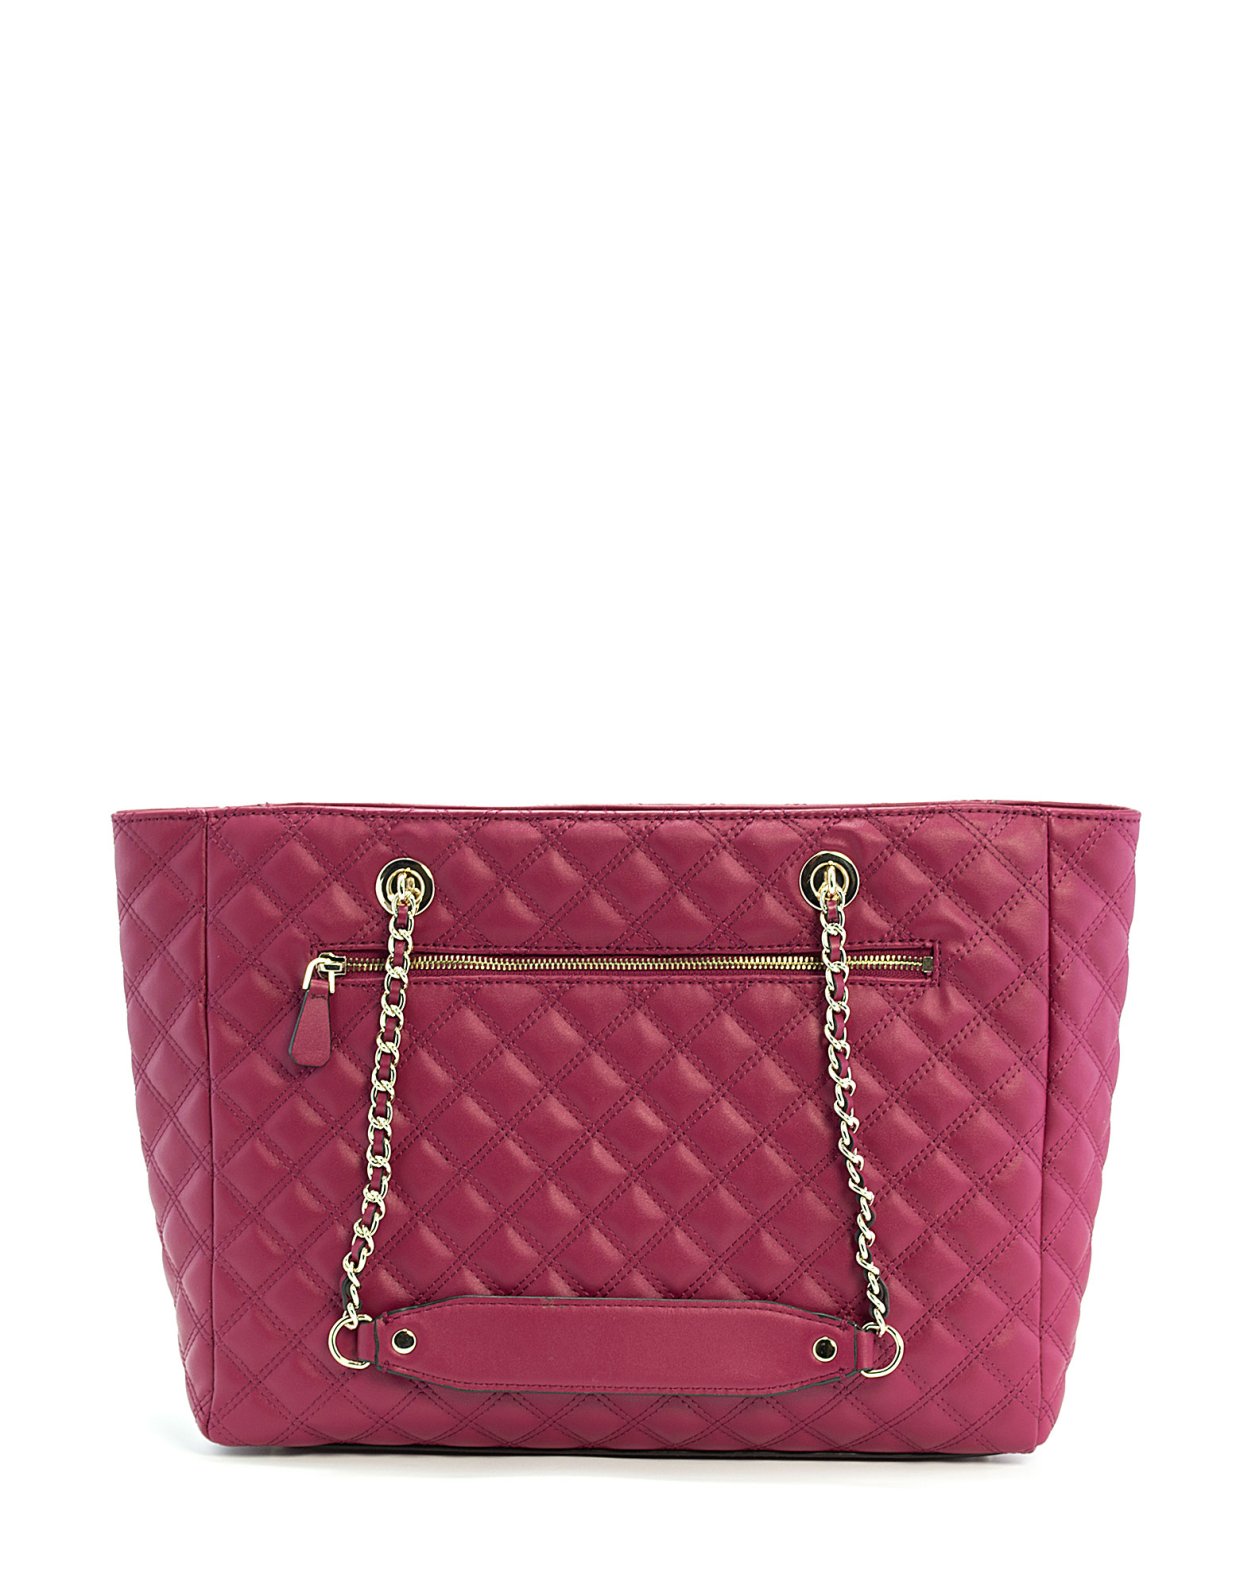 Guess Cessily quilted tote bag plum